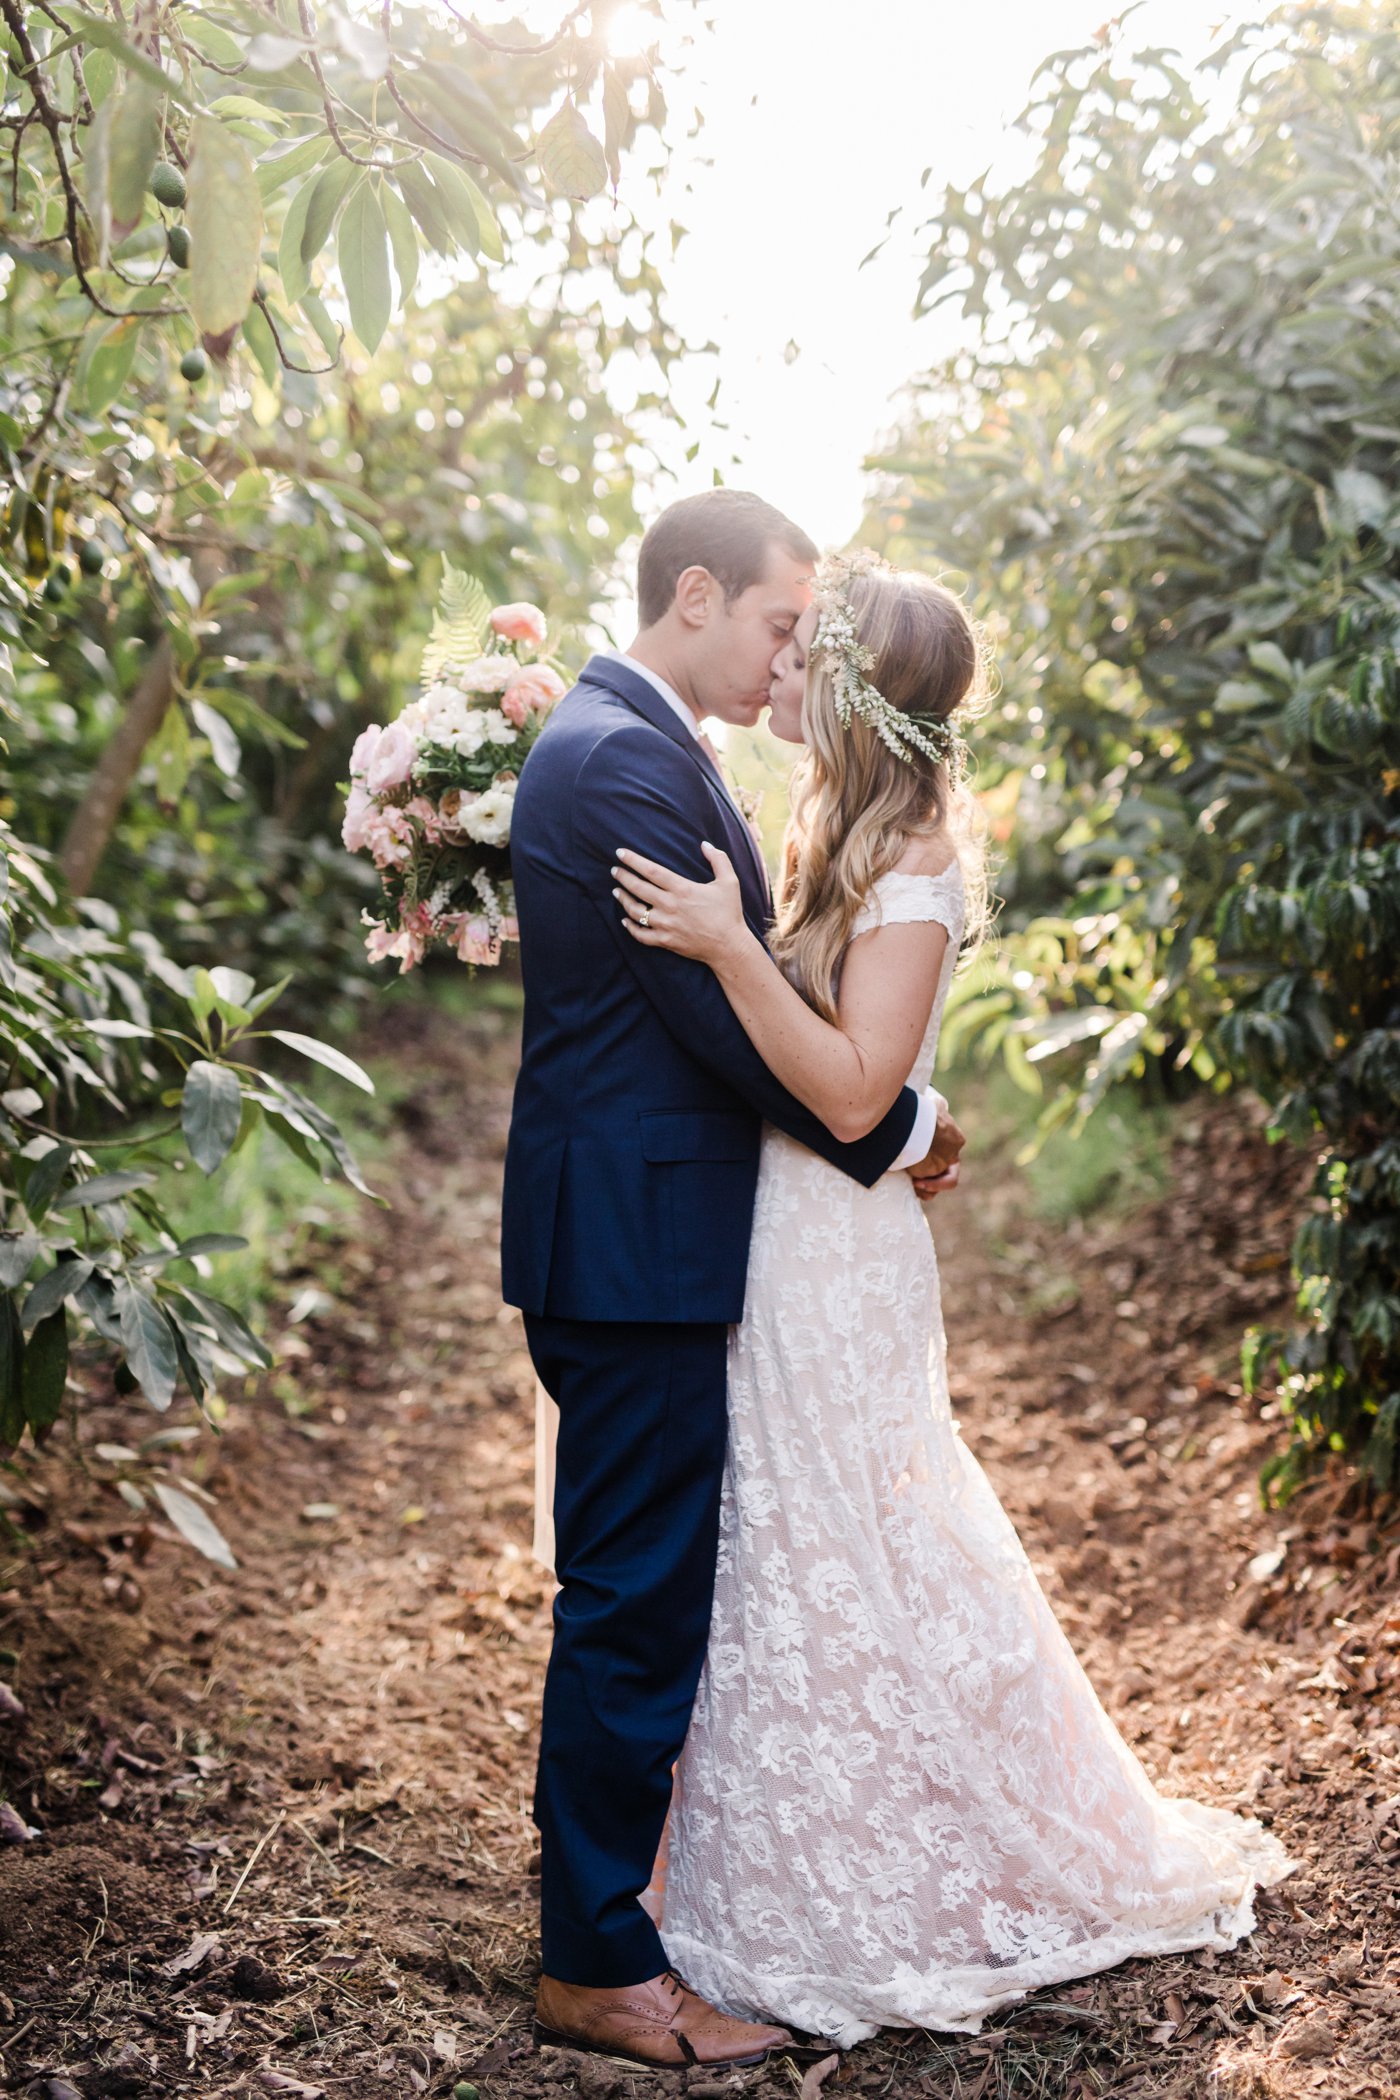 The Newly Married Couple Kissing in the Woods | The Wedding Standard